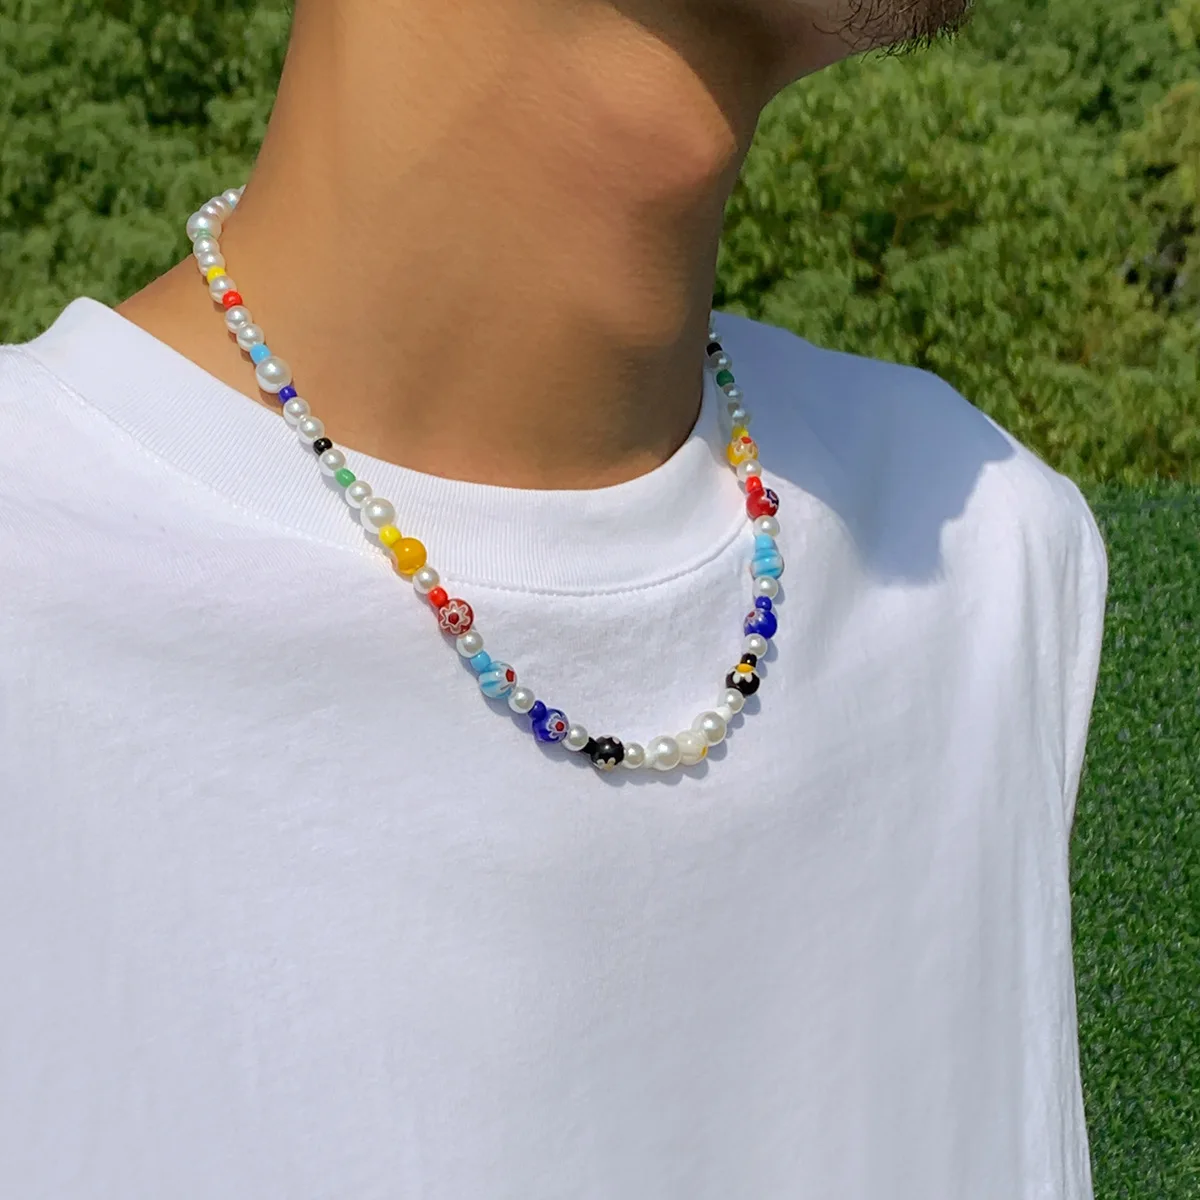 Balanced Small Aura Beads Necklace in Clear | Earthbound Trading Co.